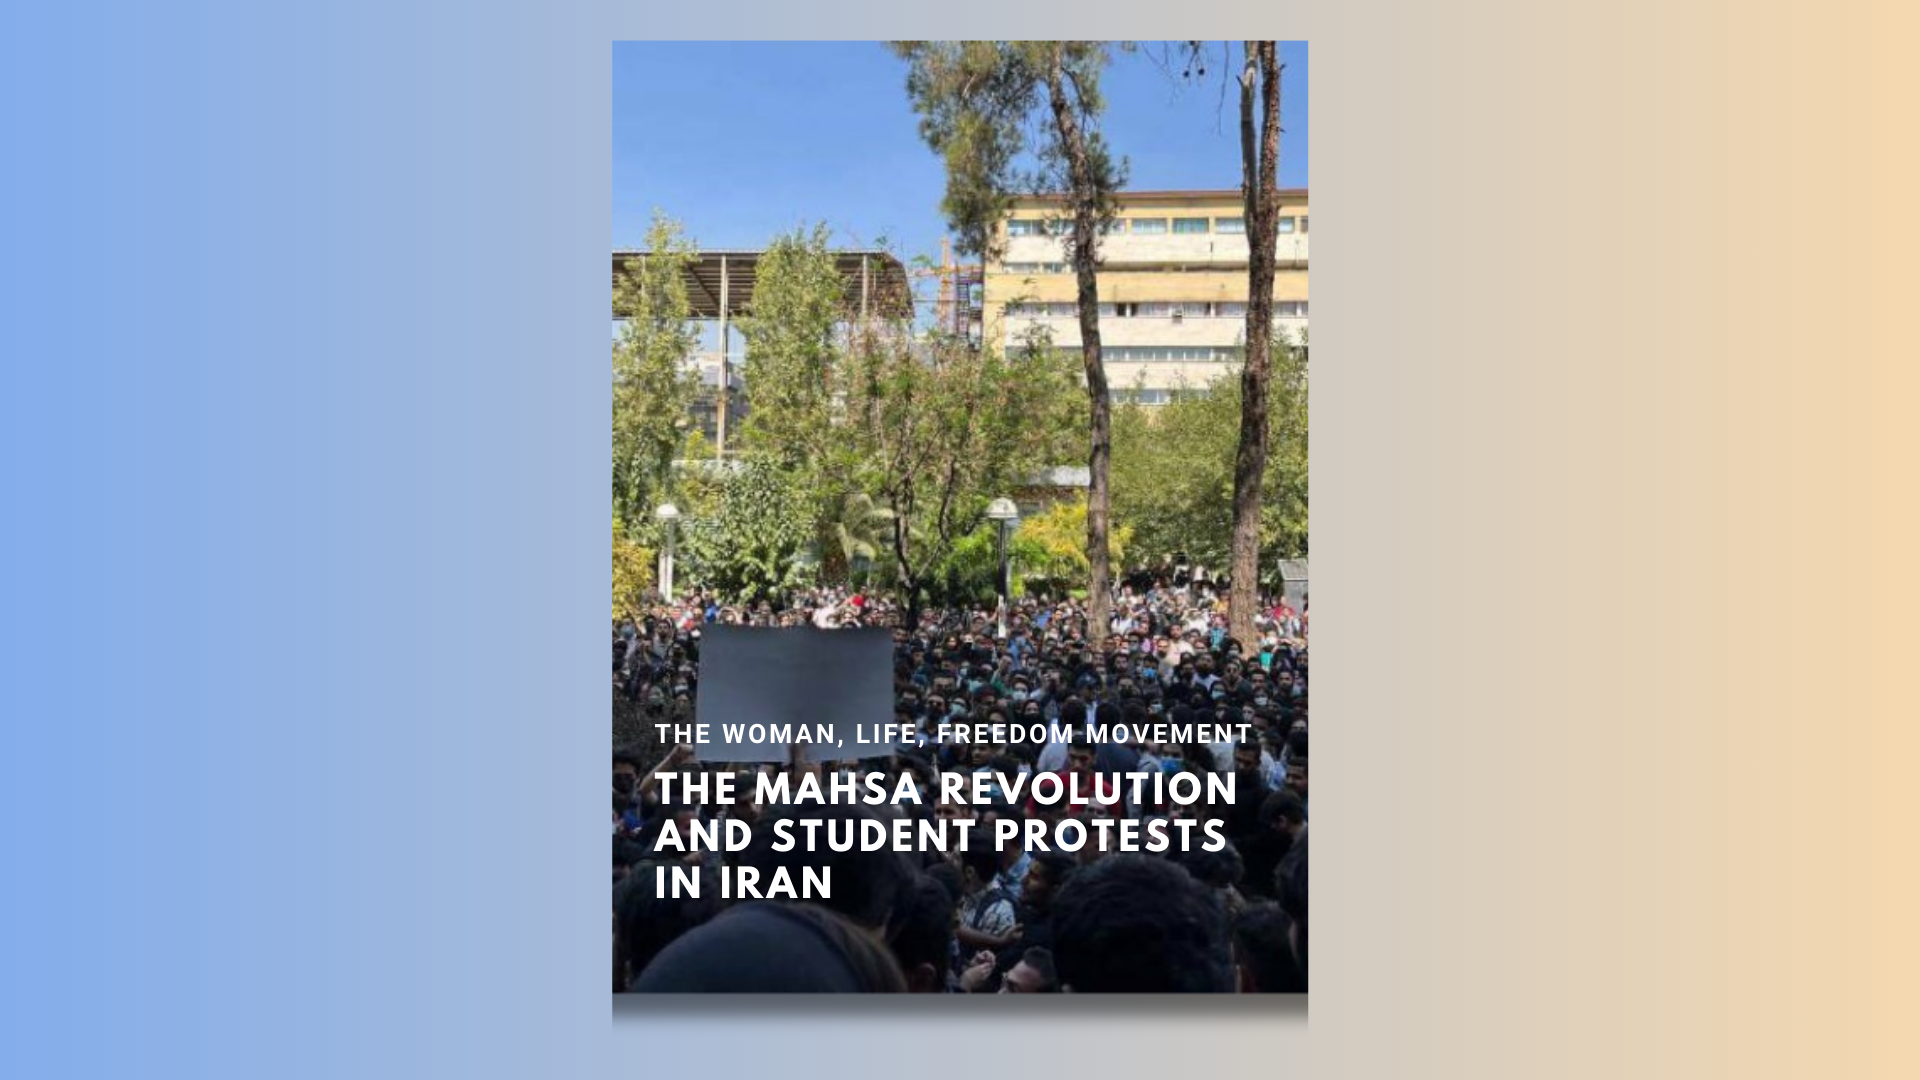 The Mahsa Revolution and Student Protests in Iran